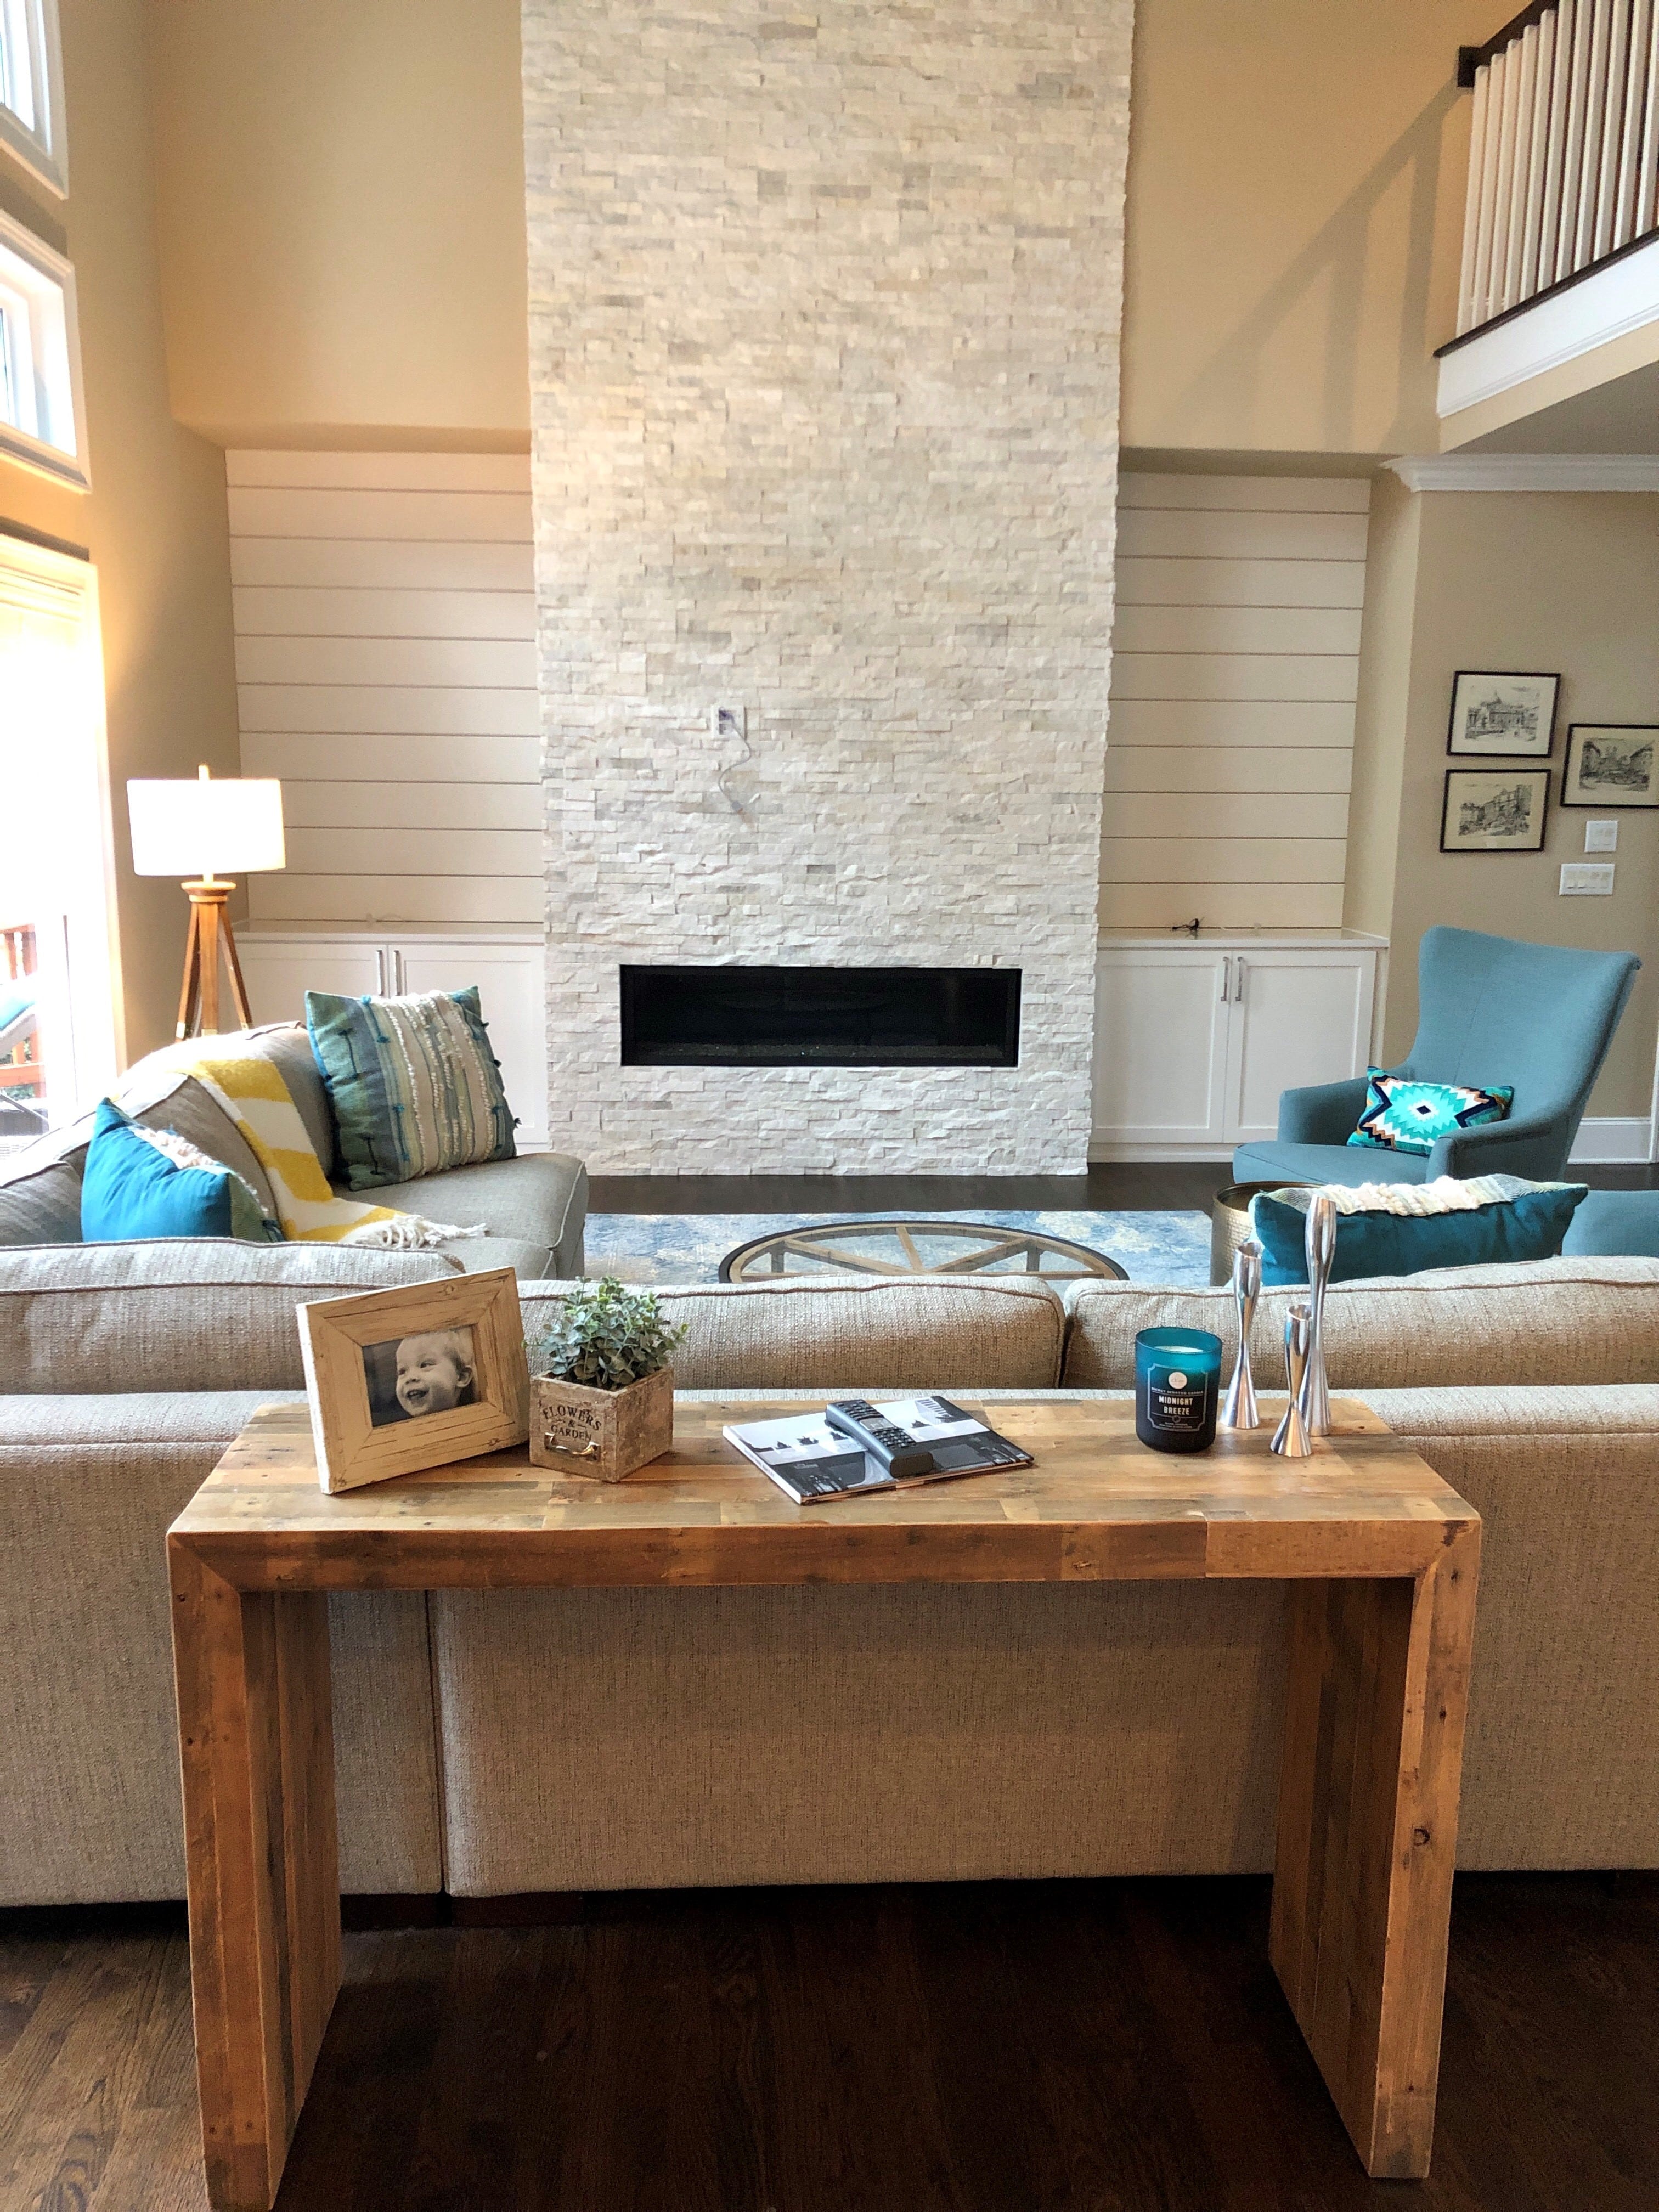 Norstone White Rock Panels used on a two story residential fireplace with a well designed living room with neutral color pallete with light blue accents